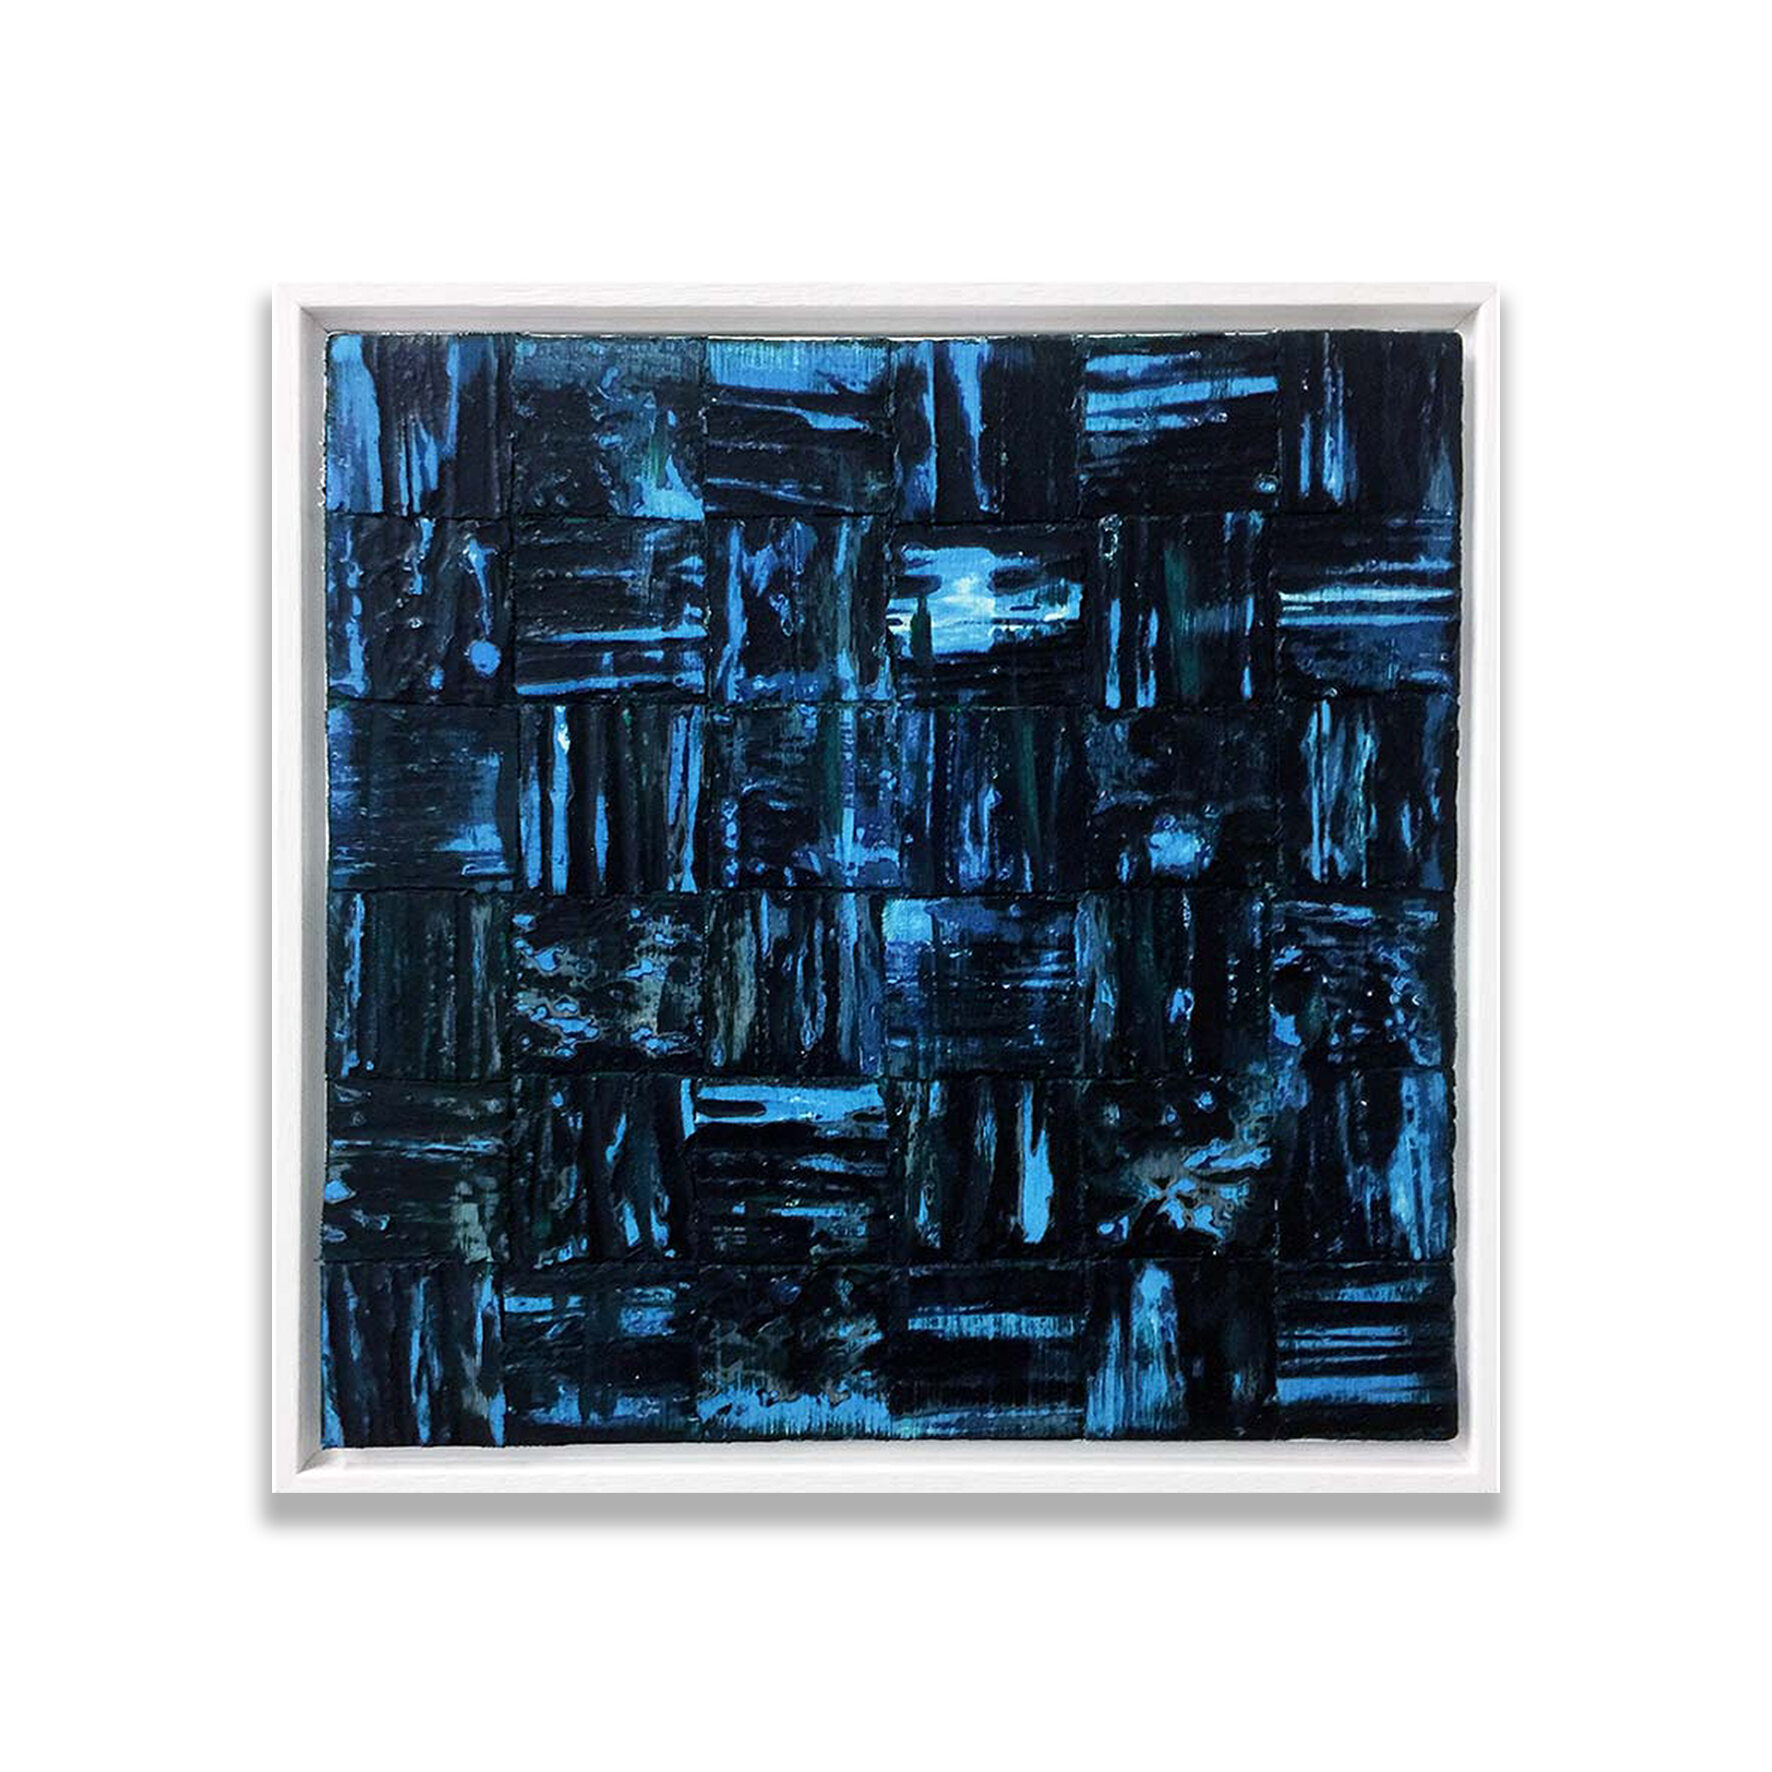 SOLD: Madeleine Tuckfield-Carrano - Meta Tesserae - Midnights in Paris. Mixed Media on Canvas. Image size: 30x30cm Framed (white)